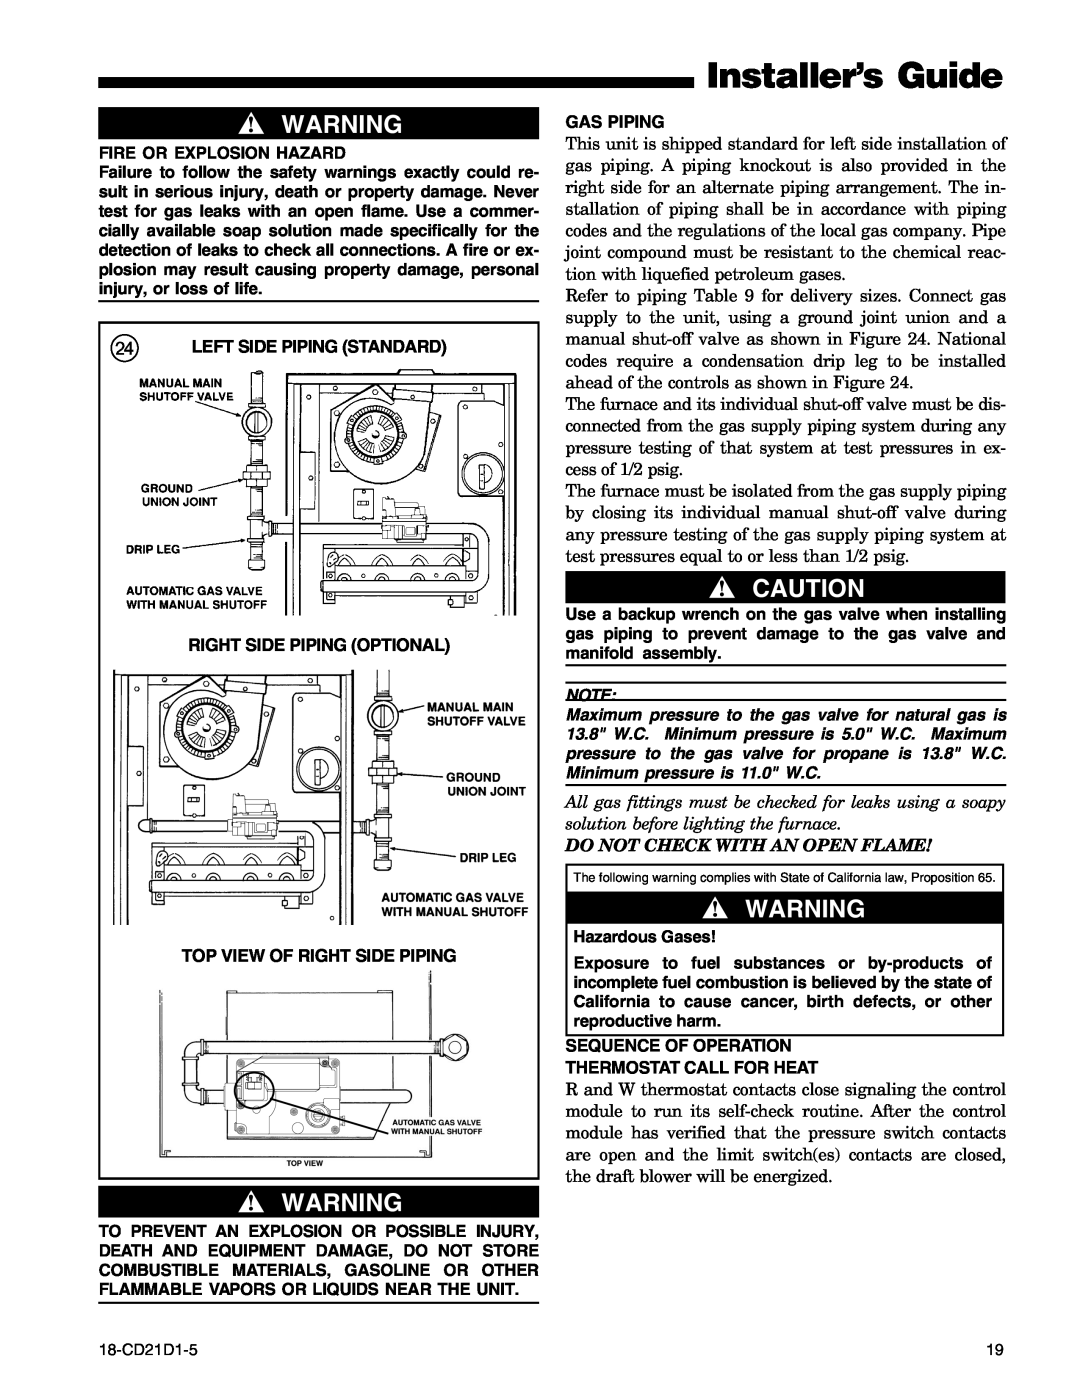 Trane UD1C100A9H51B, UD1D120A9H51B manual Installer’s Guide, Fire Or Explosion Hazard, Do Not Check With An Open Flame 